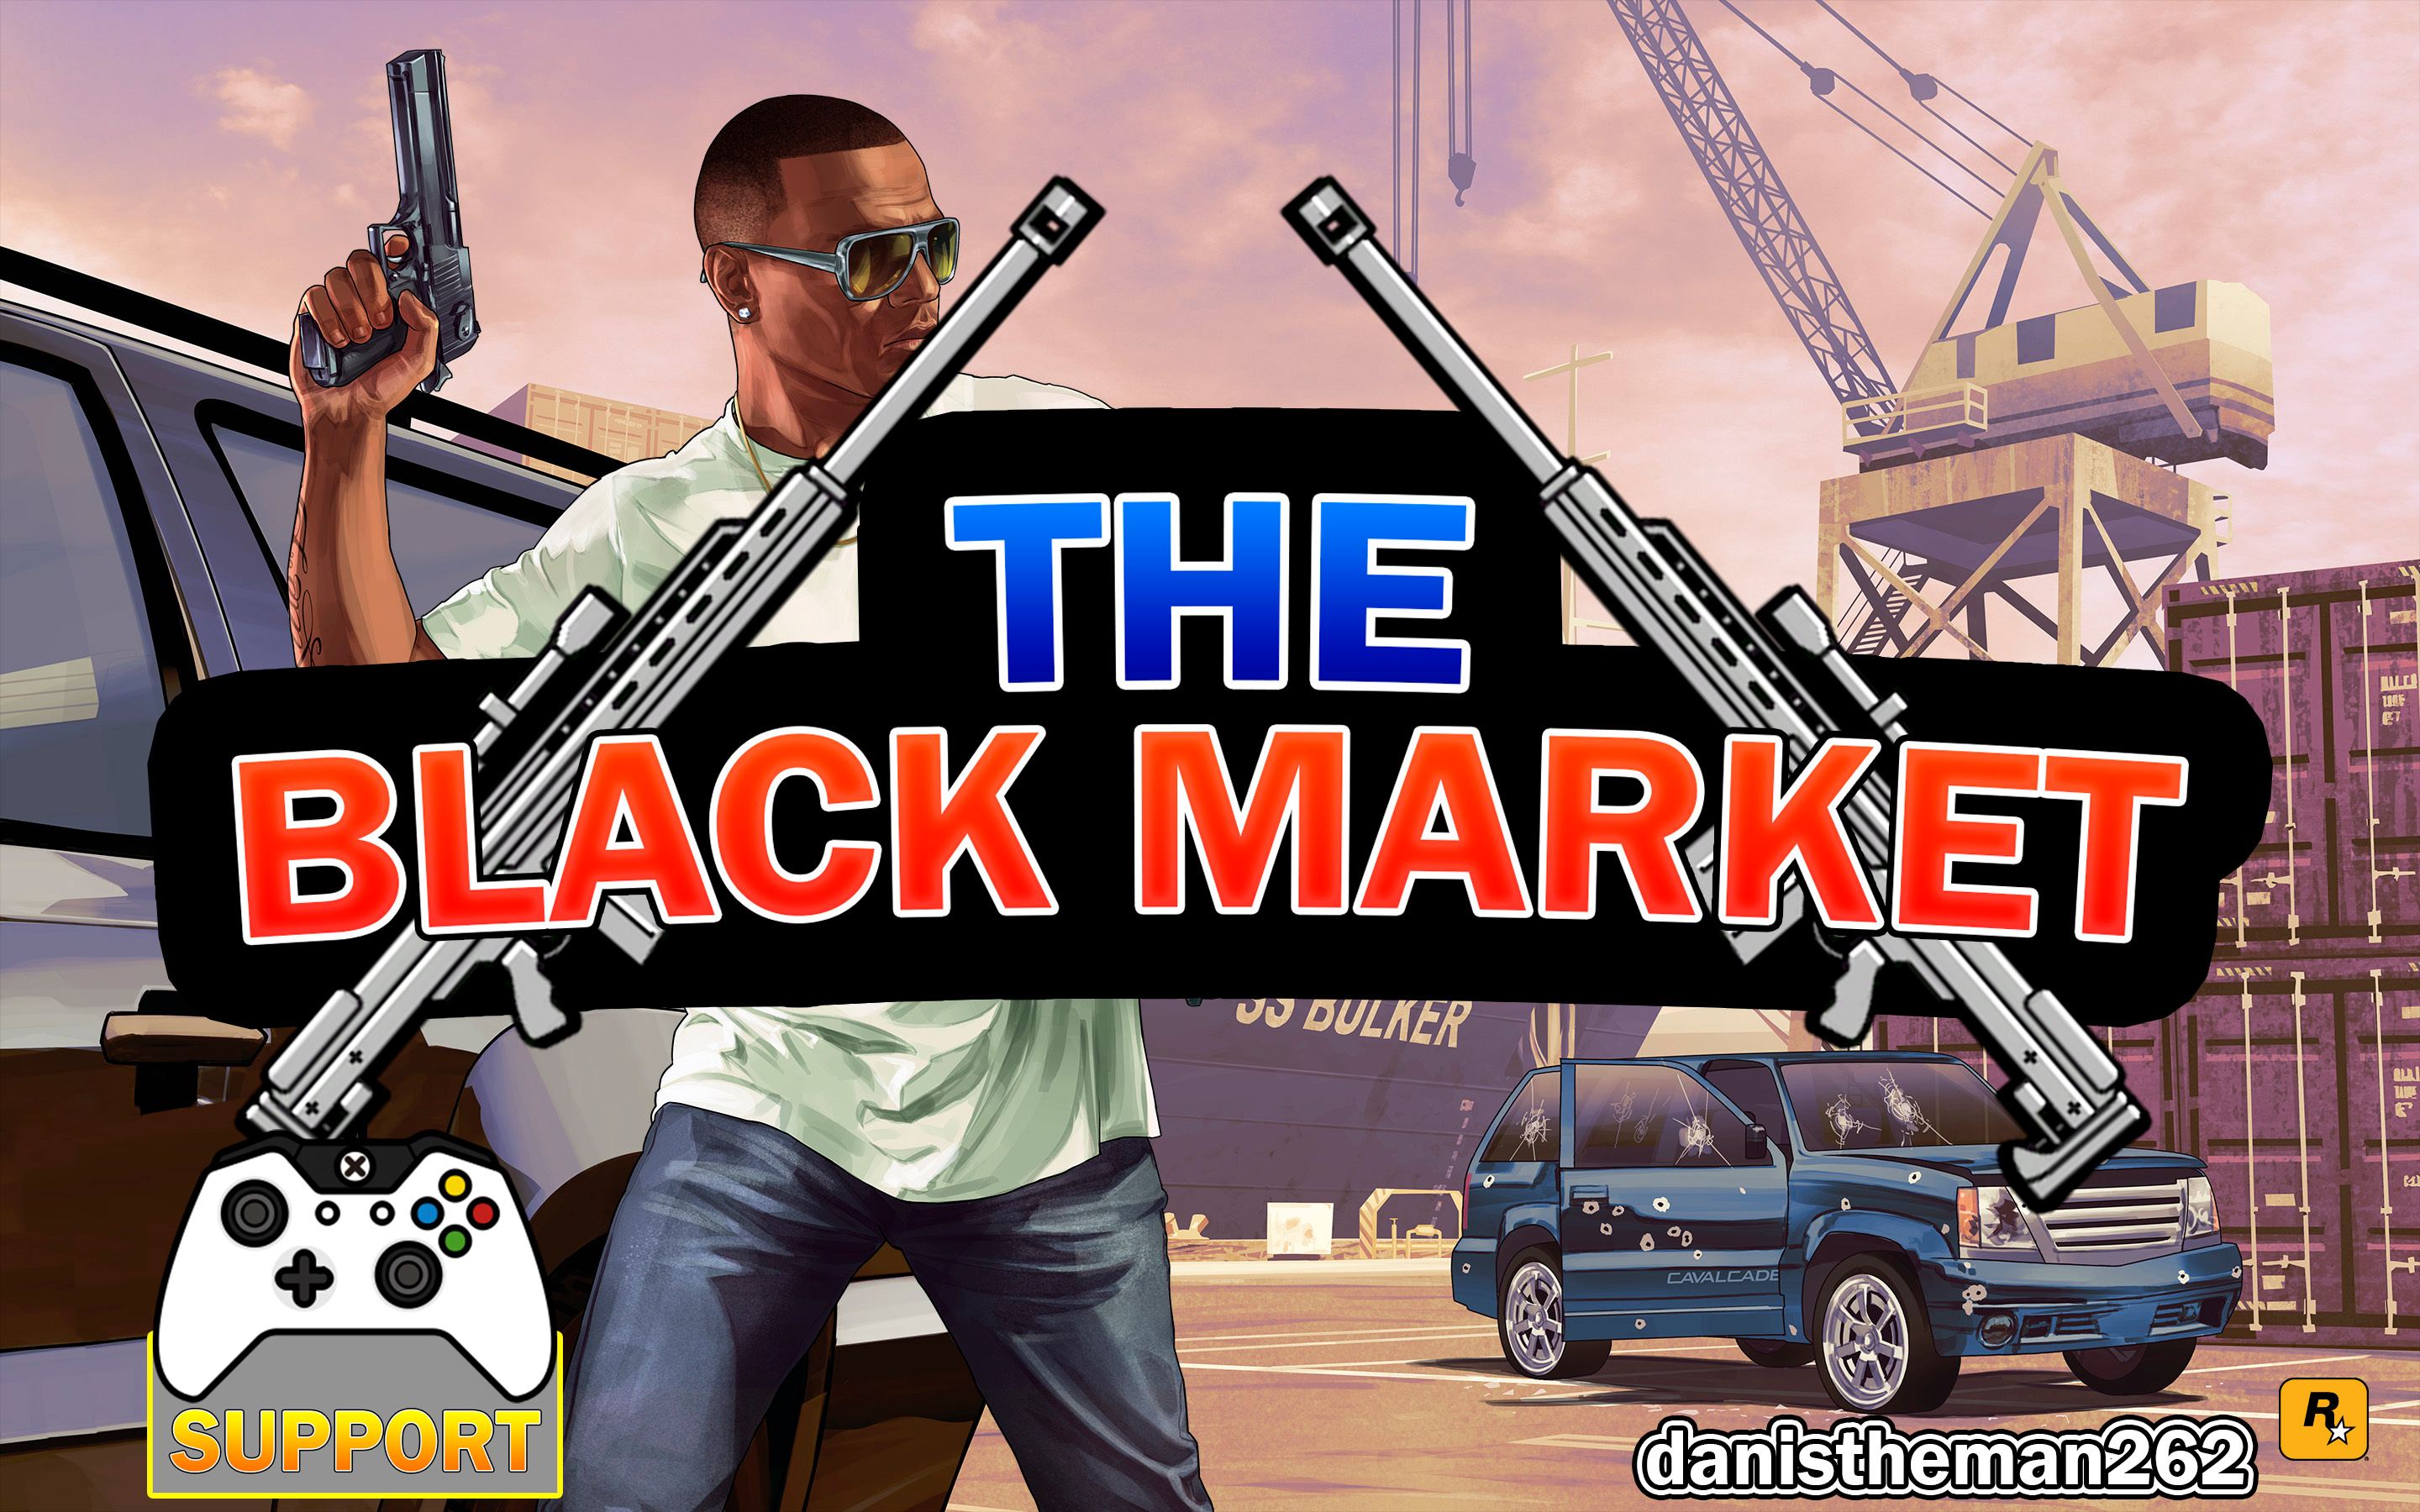 This GTA 5 black market guns mod completely changes the game